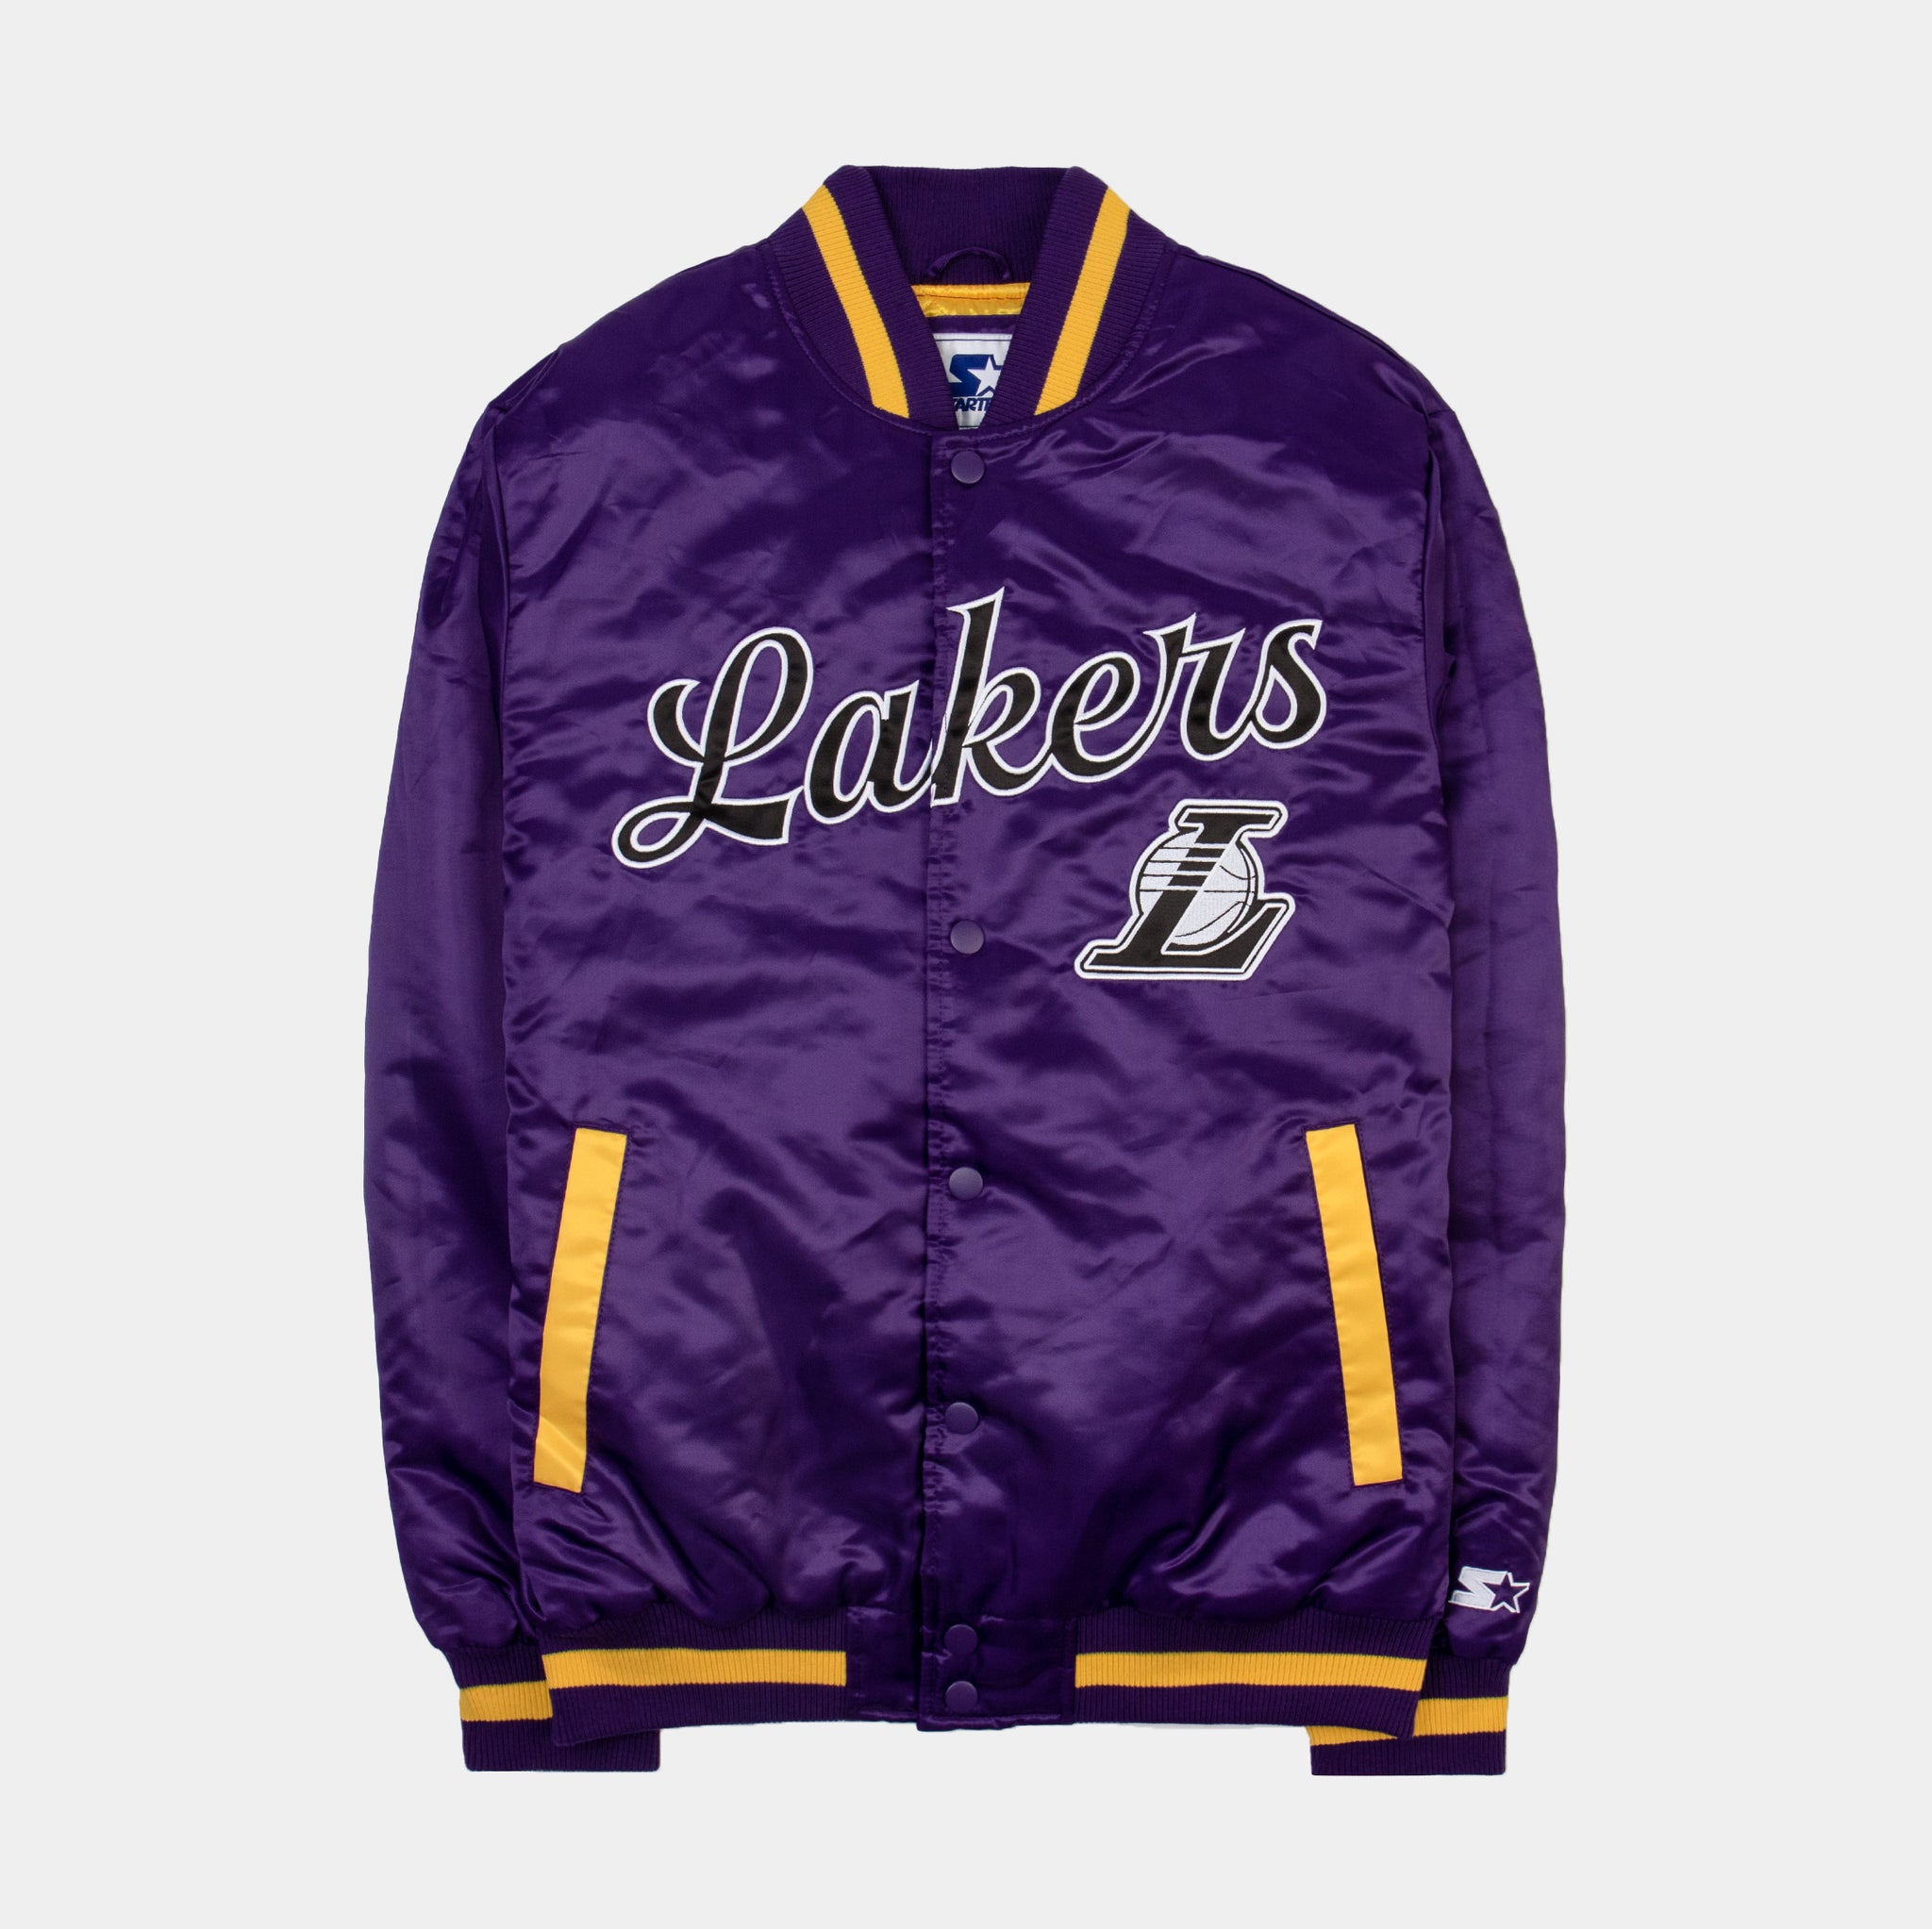 Los Angeles Lakers Jacket, Lakers Pullover, Los Angeles Lakers Varsity  Jackets, Fleece Jacket